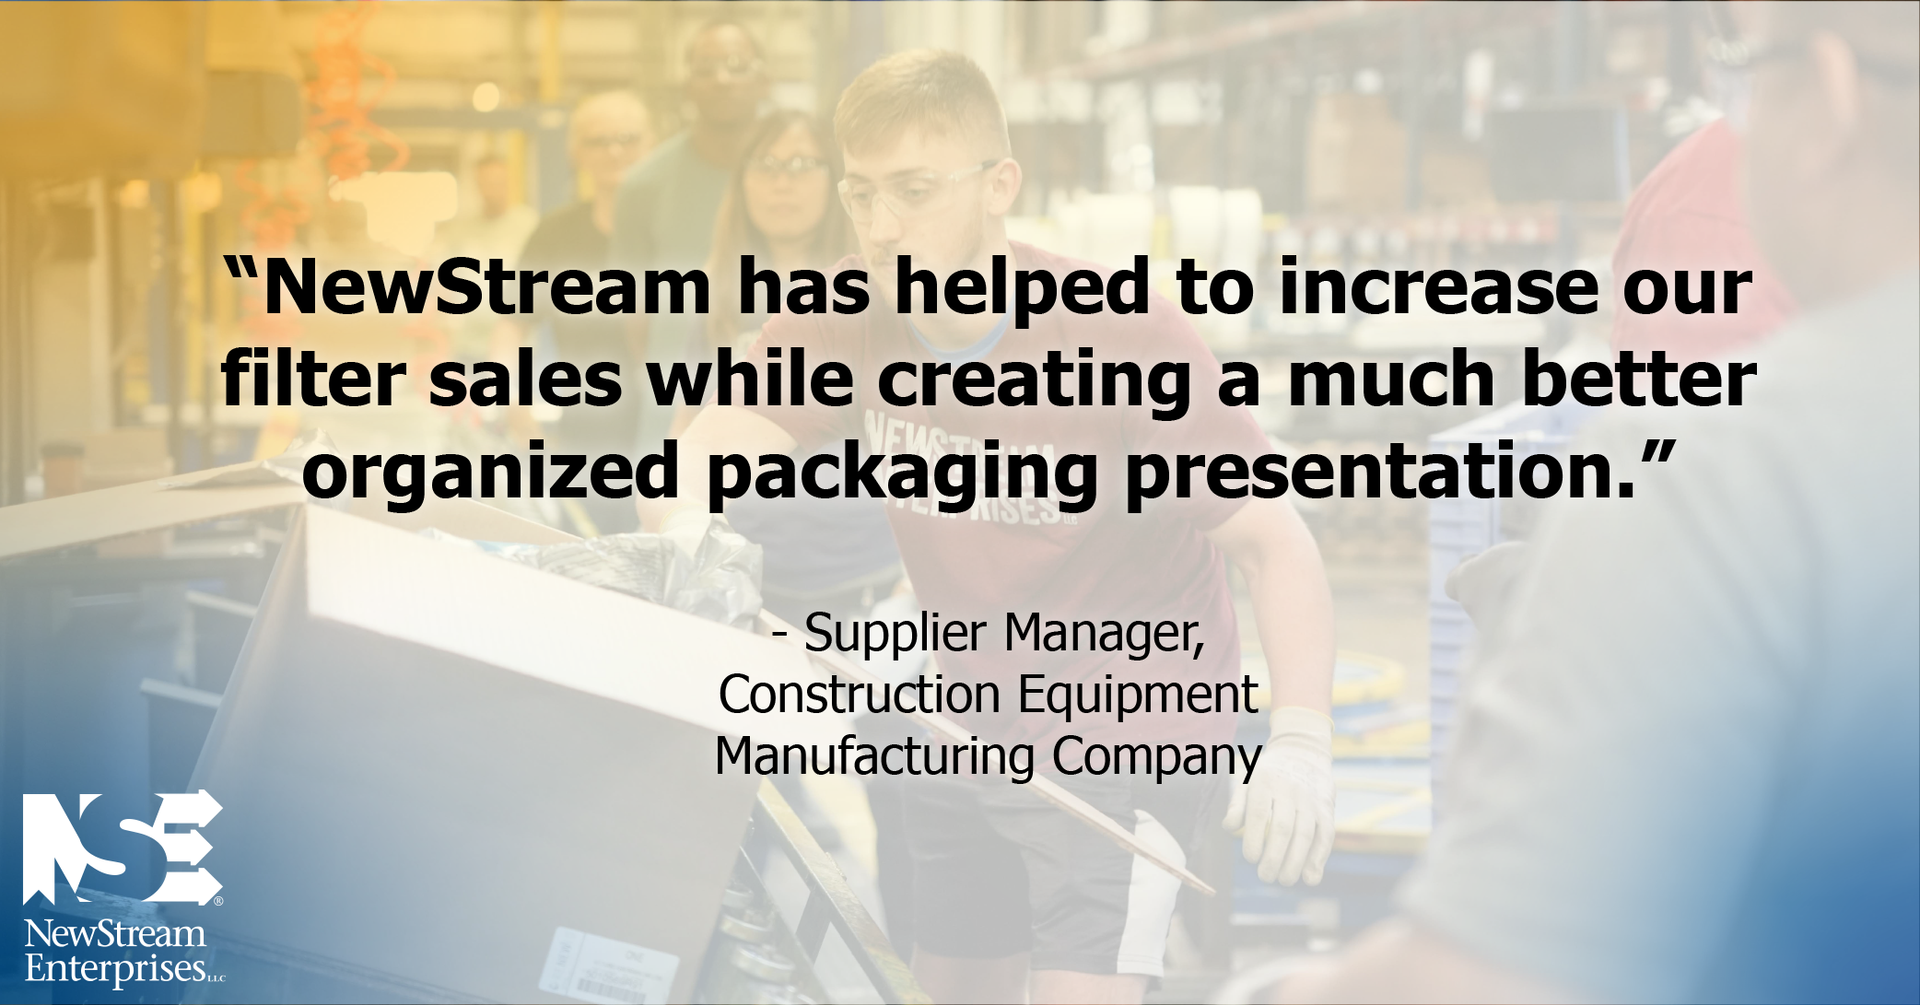 NewStream has helped increase filter sales